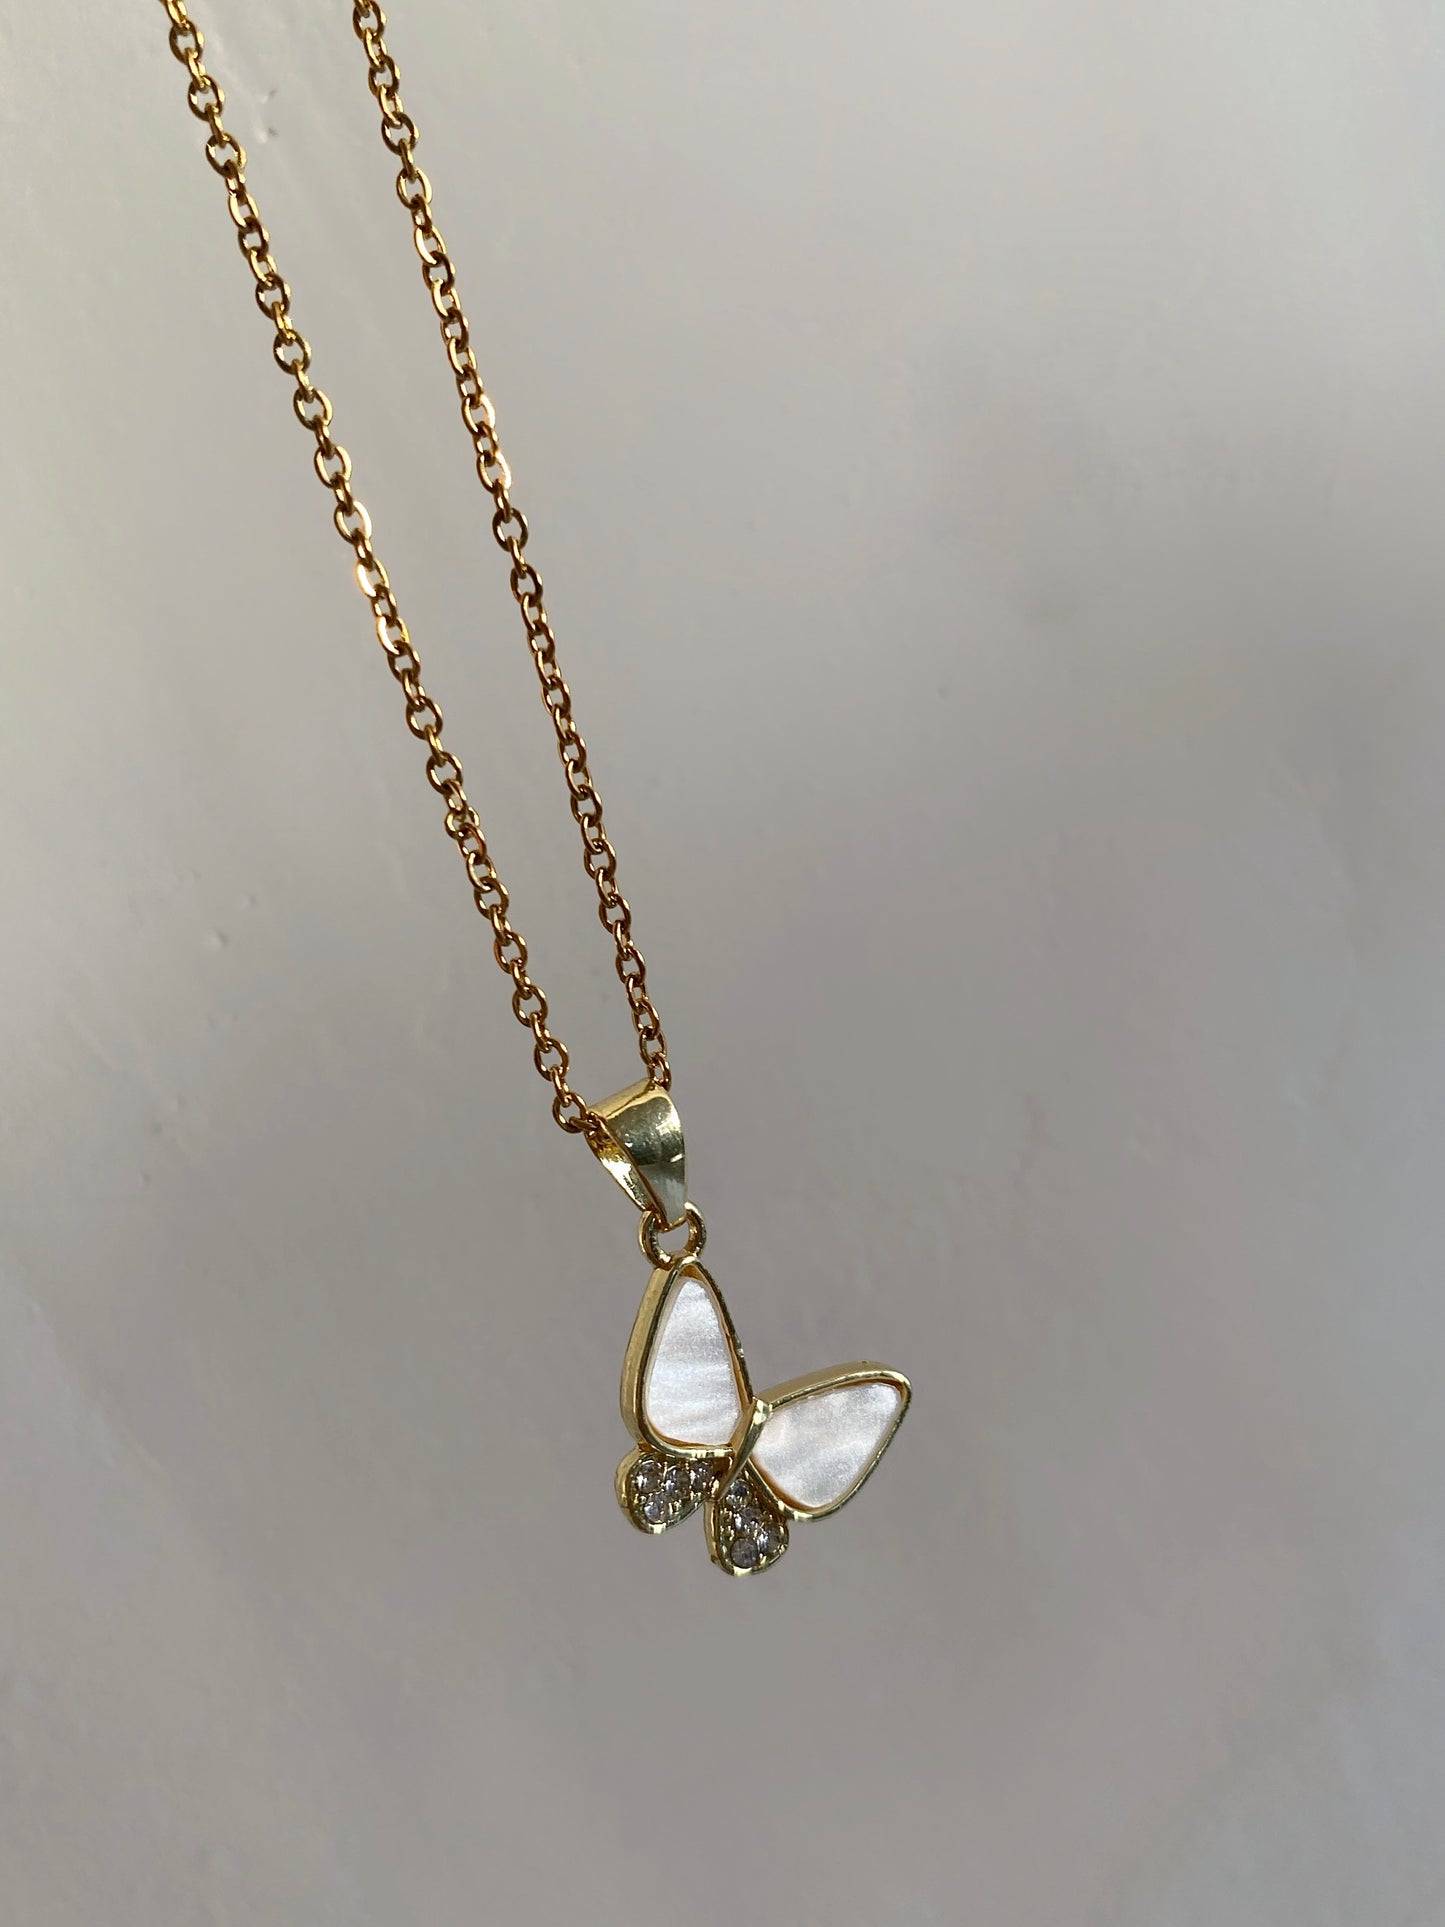 BUTTERFLY PLAYING ON A GOLDEN CHAIN - NECKLACE